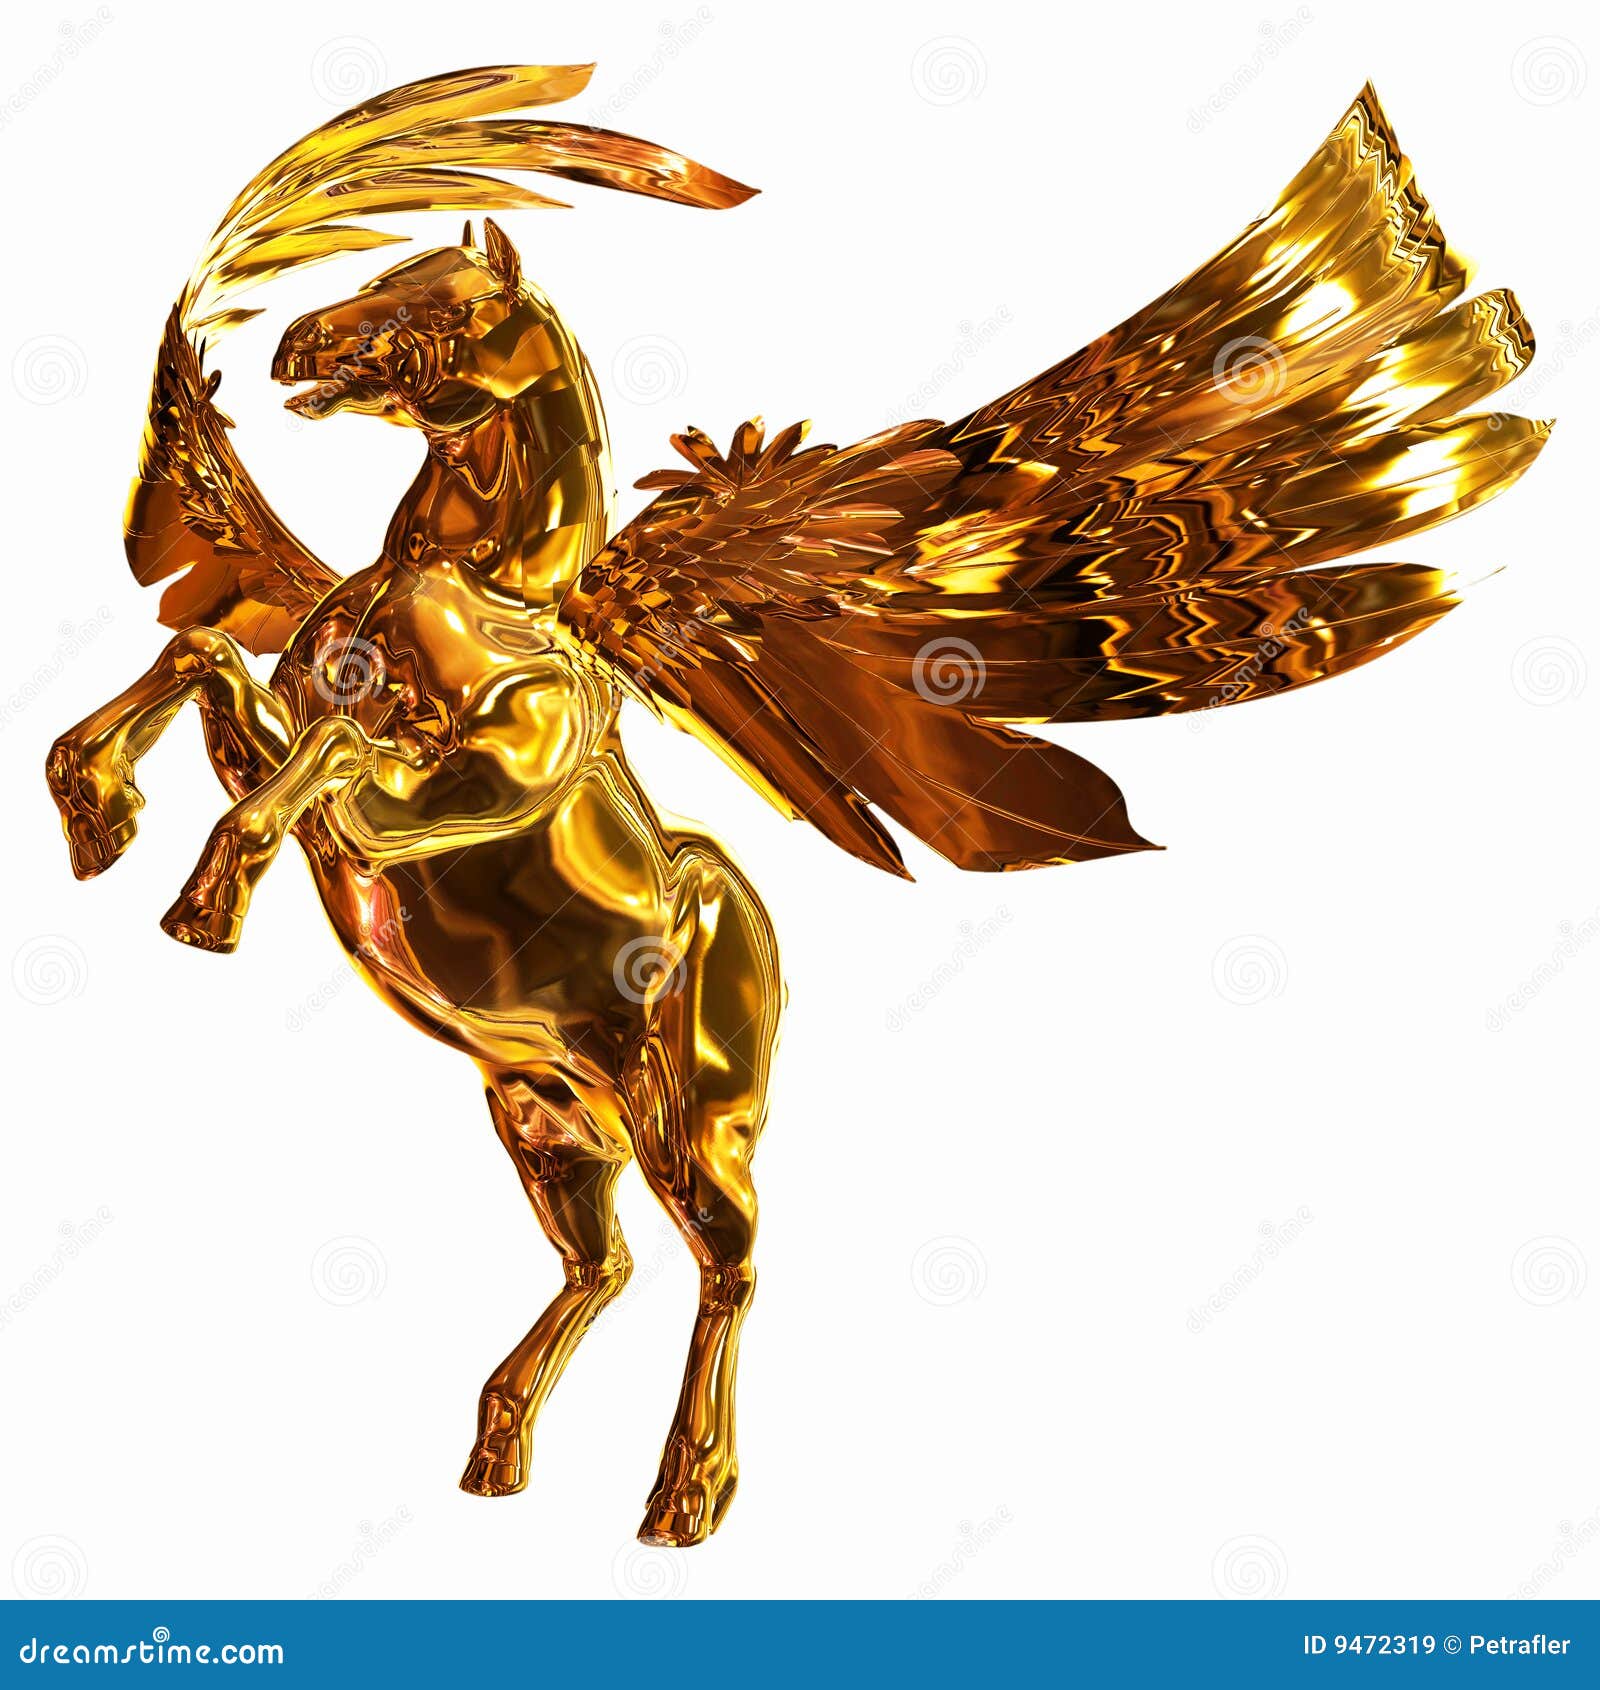 golden winged horse